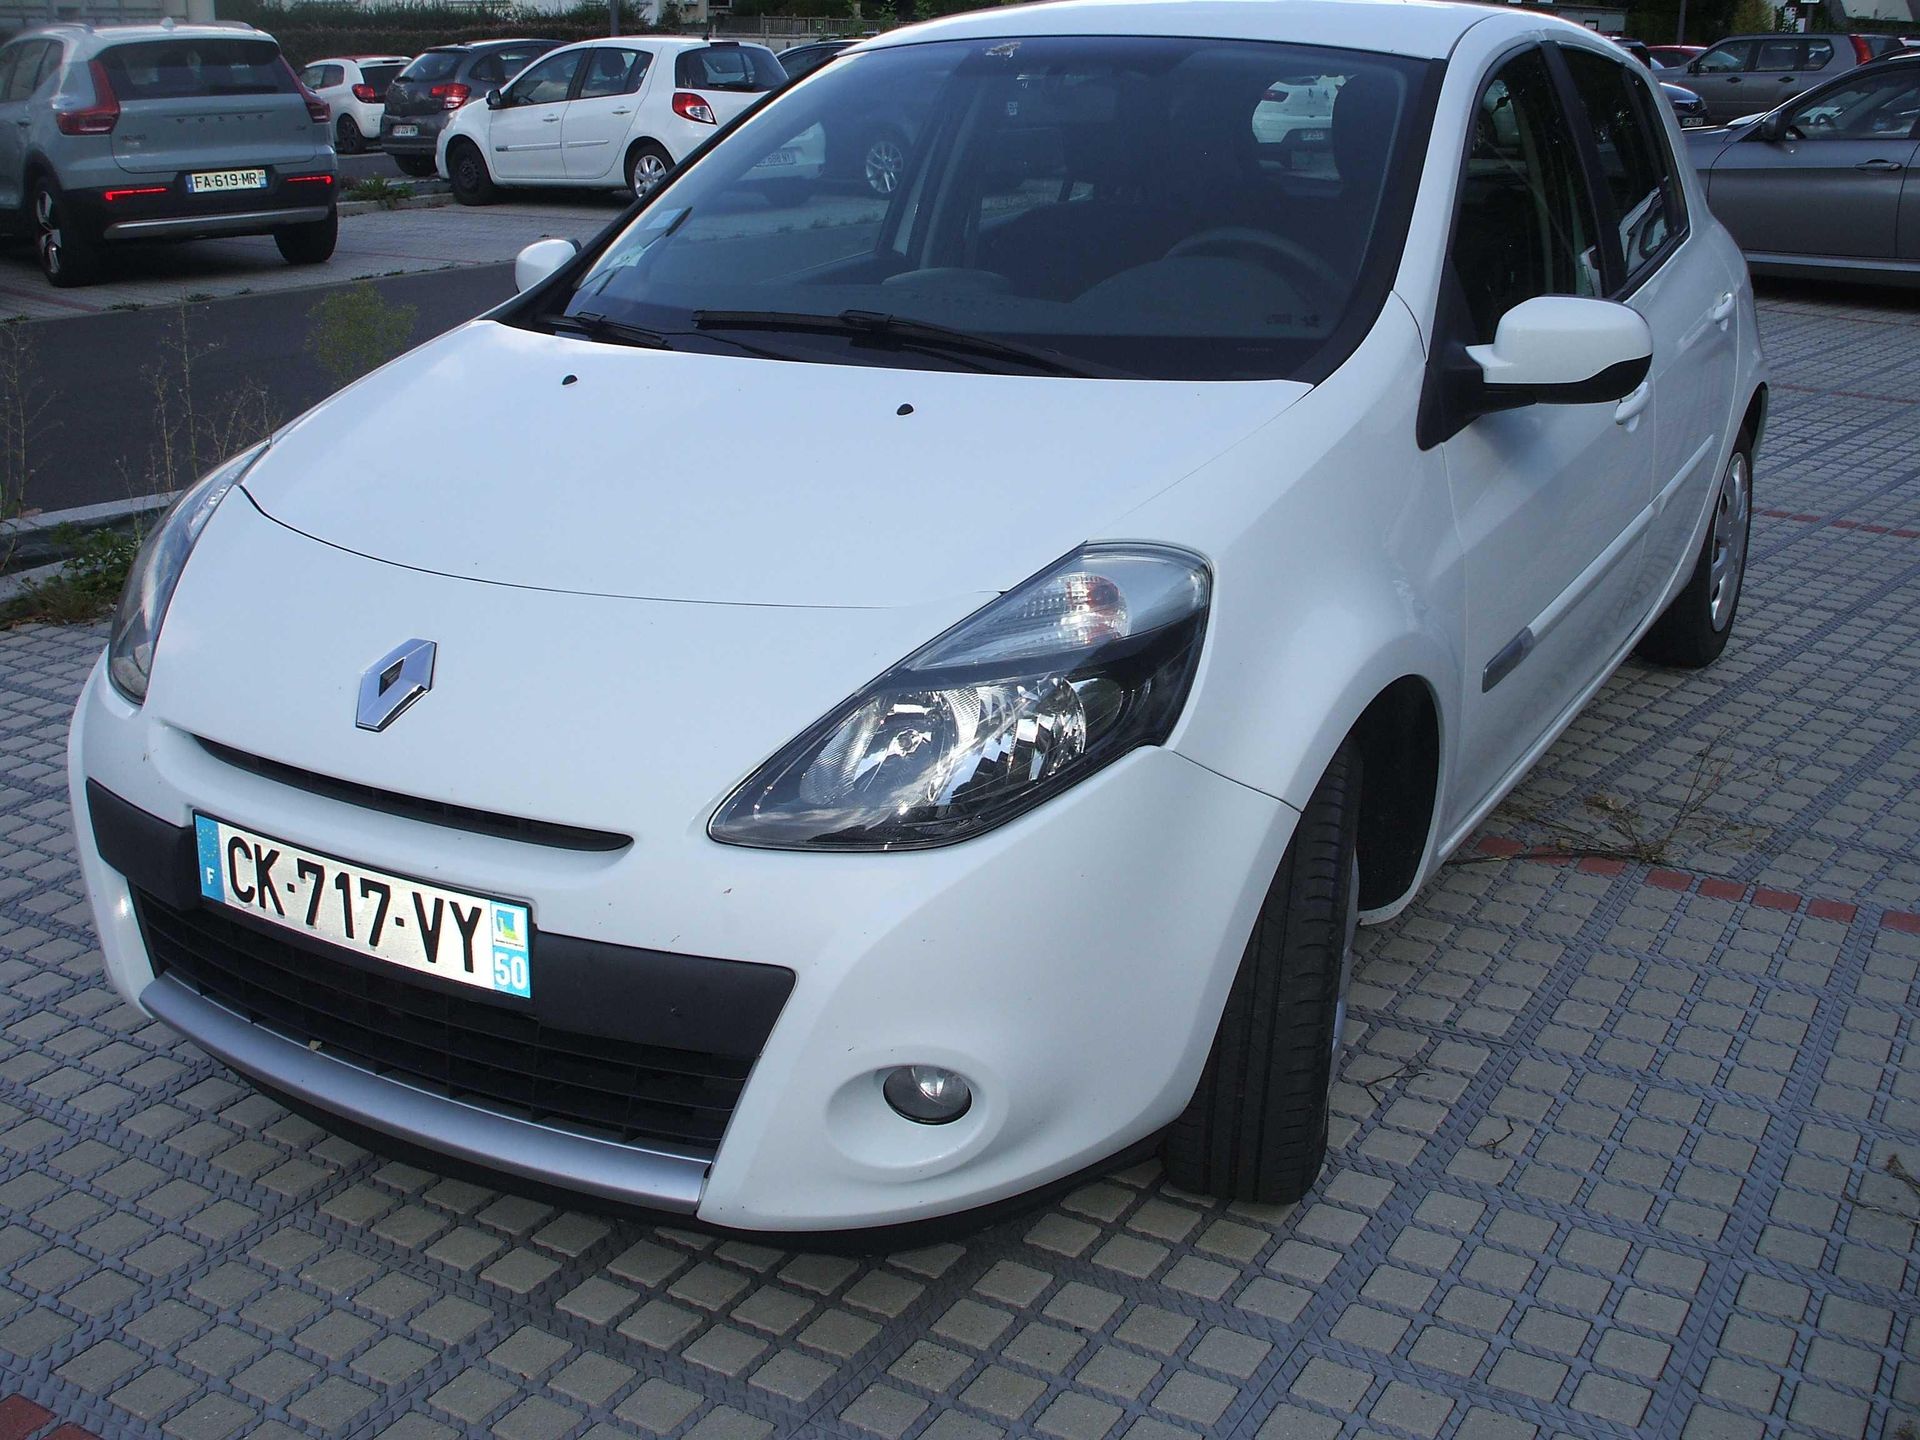 Null [CT] RENAULT Clio III Phase 2 1.5 dCi eco2 75 cv, Gazole, imm. CK-717-VY, t&hellip;